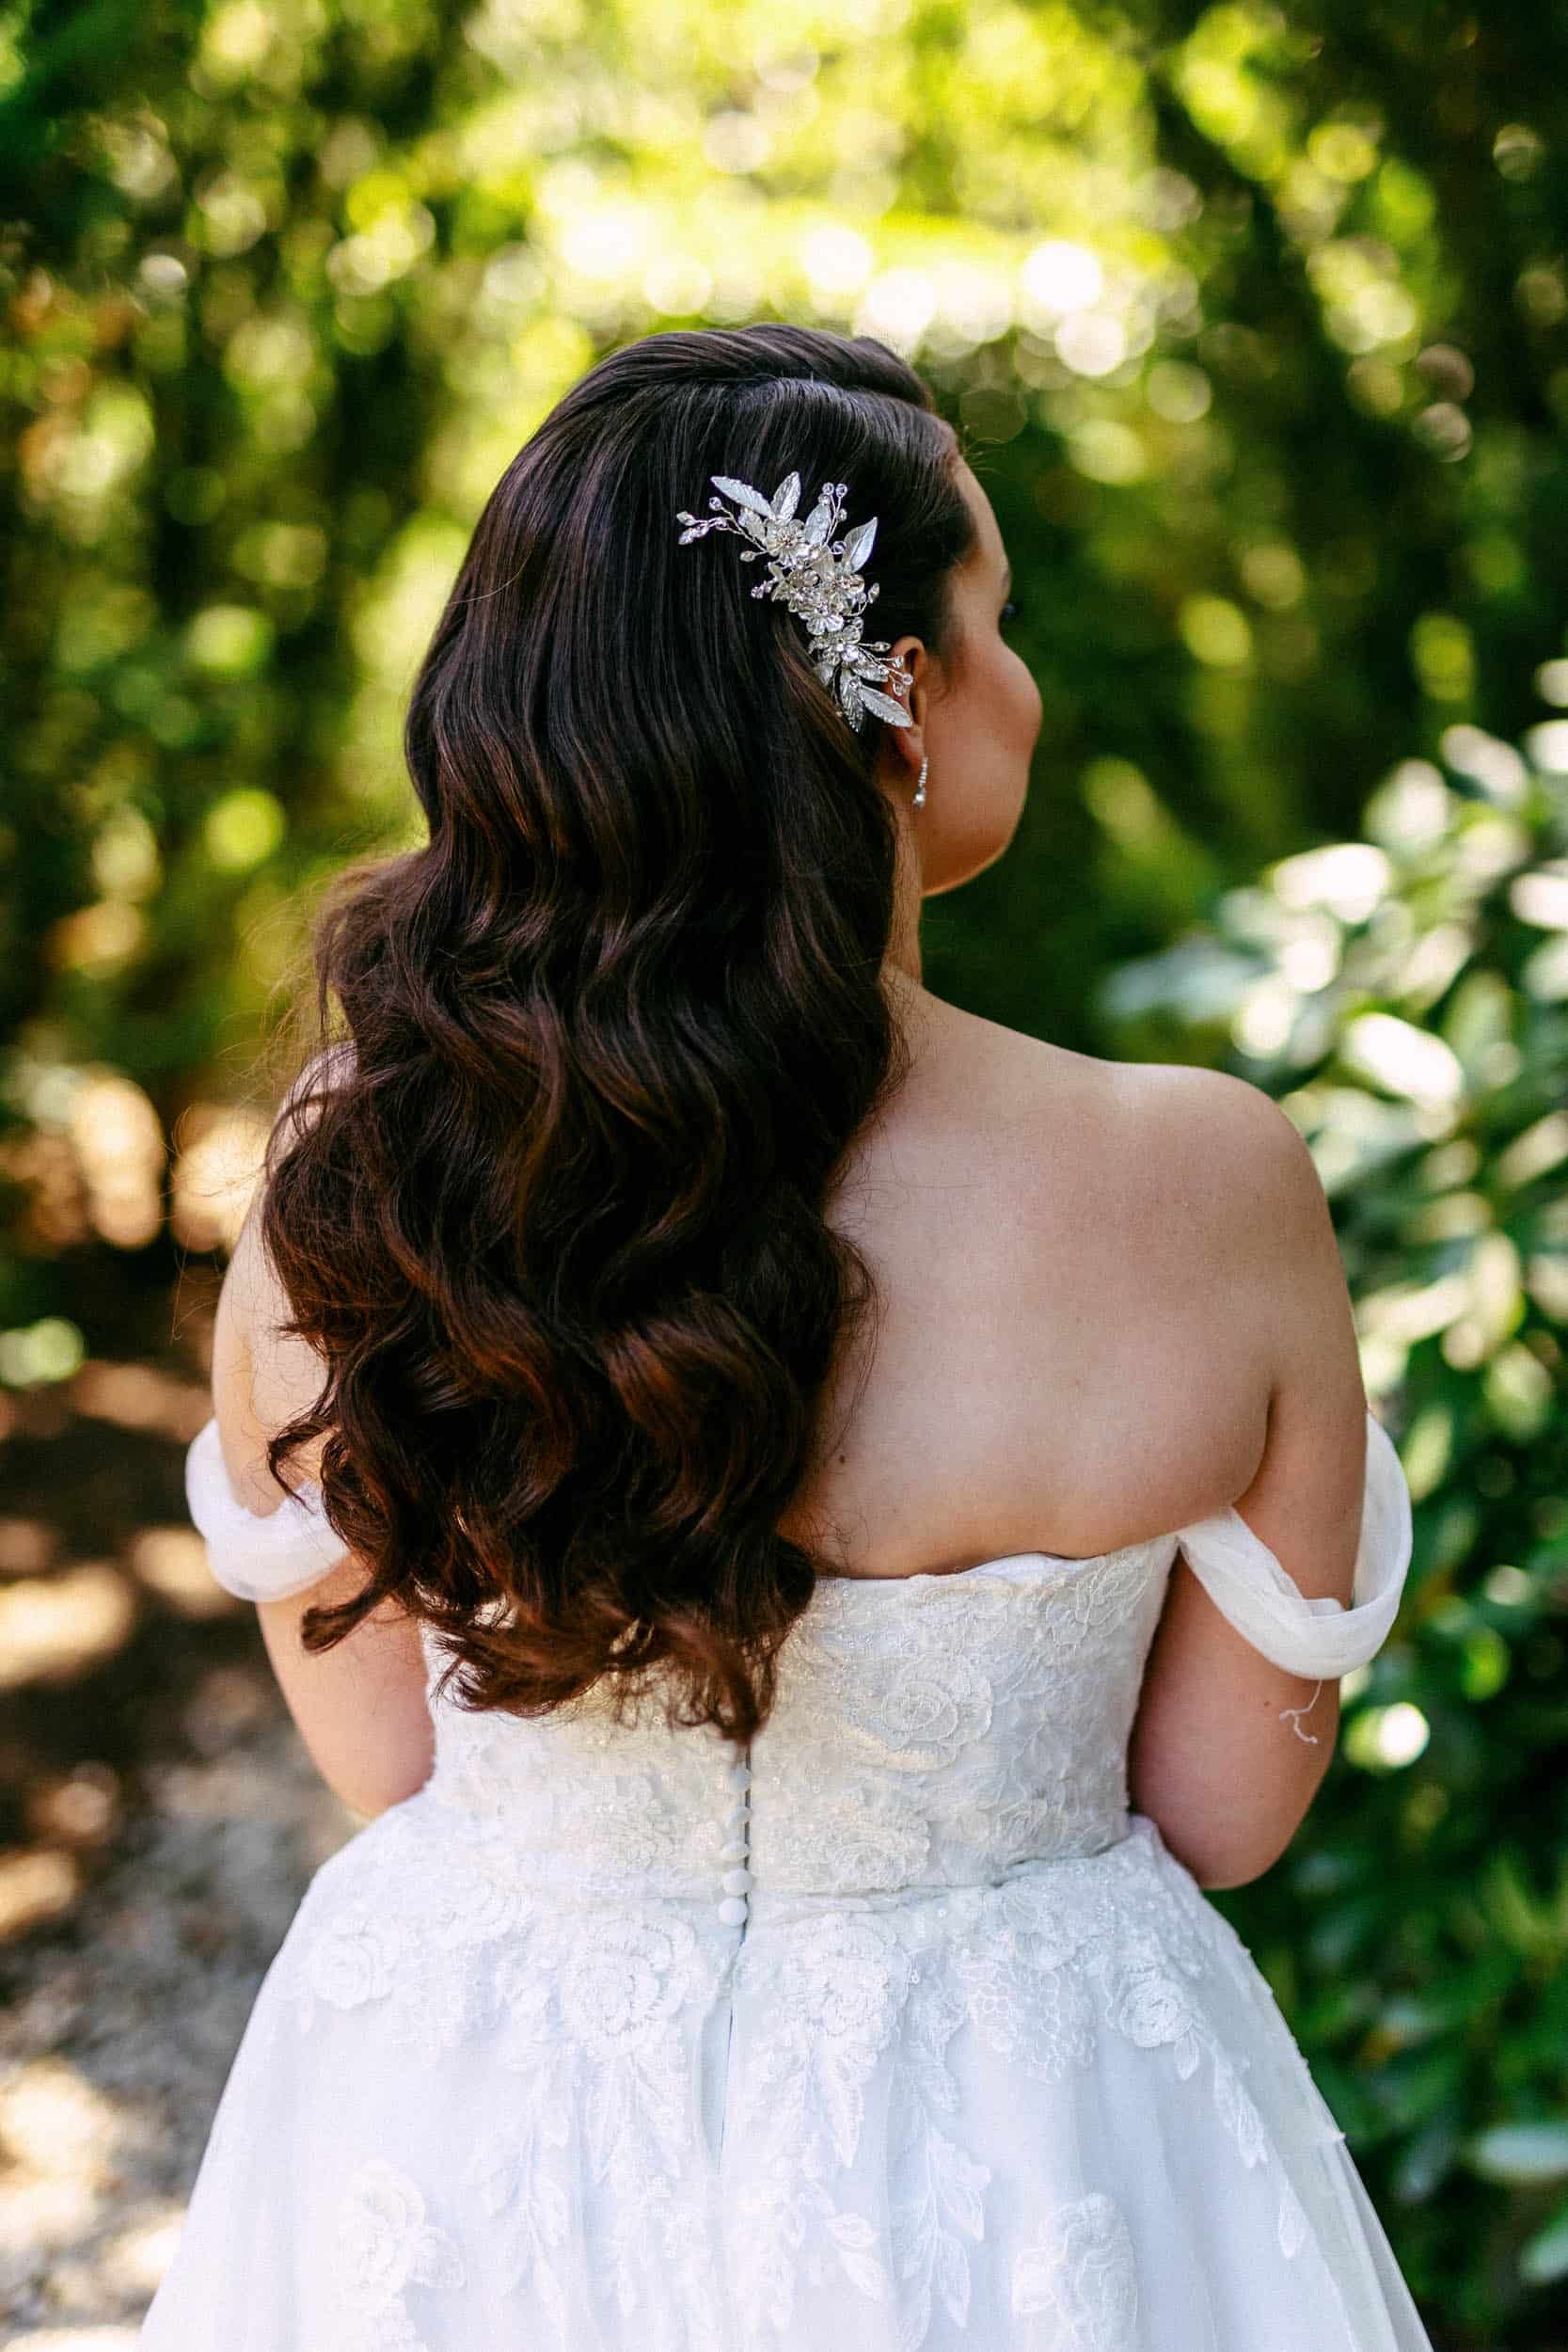 The back of a bride in wedding dress walking through the forest.